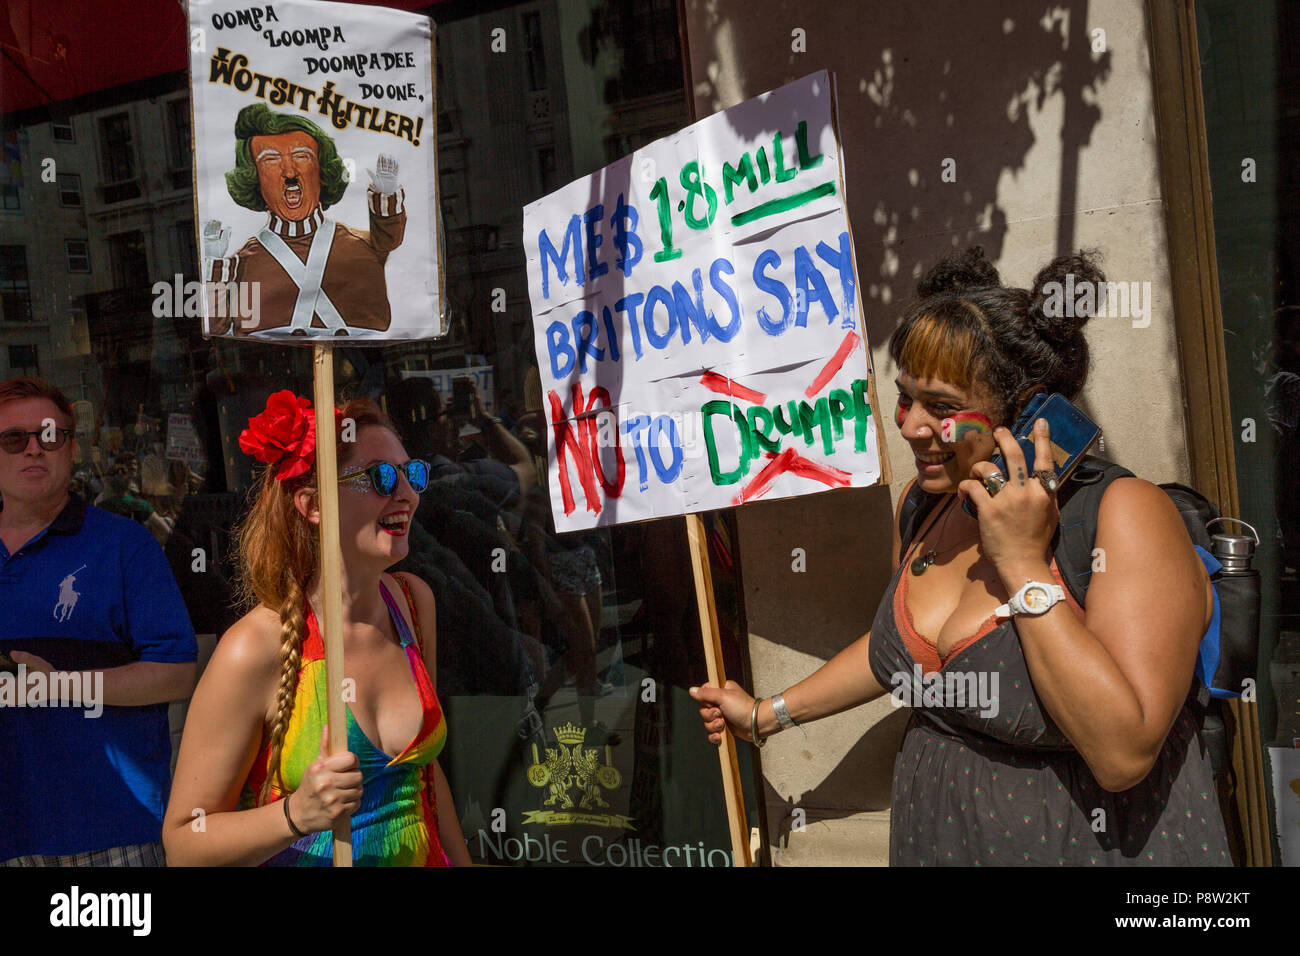 London, UK: Protesters against the visit of US President Donald Trump to the UK, march through central London, on 13th July 2018, in London, England. Photo by Richard Baker / Alamy Live News Stock Photo